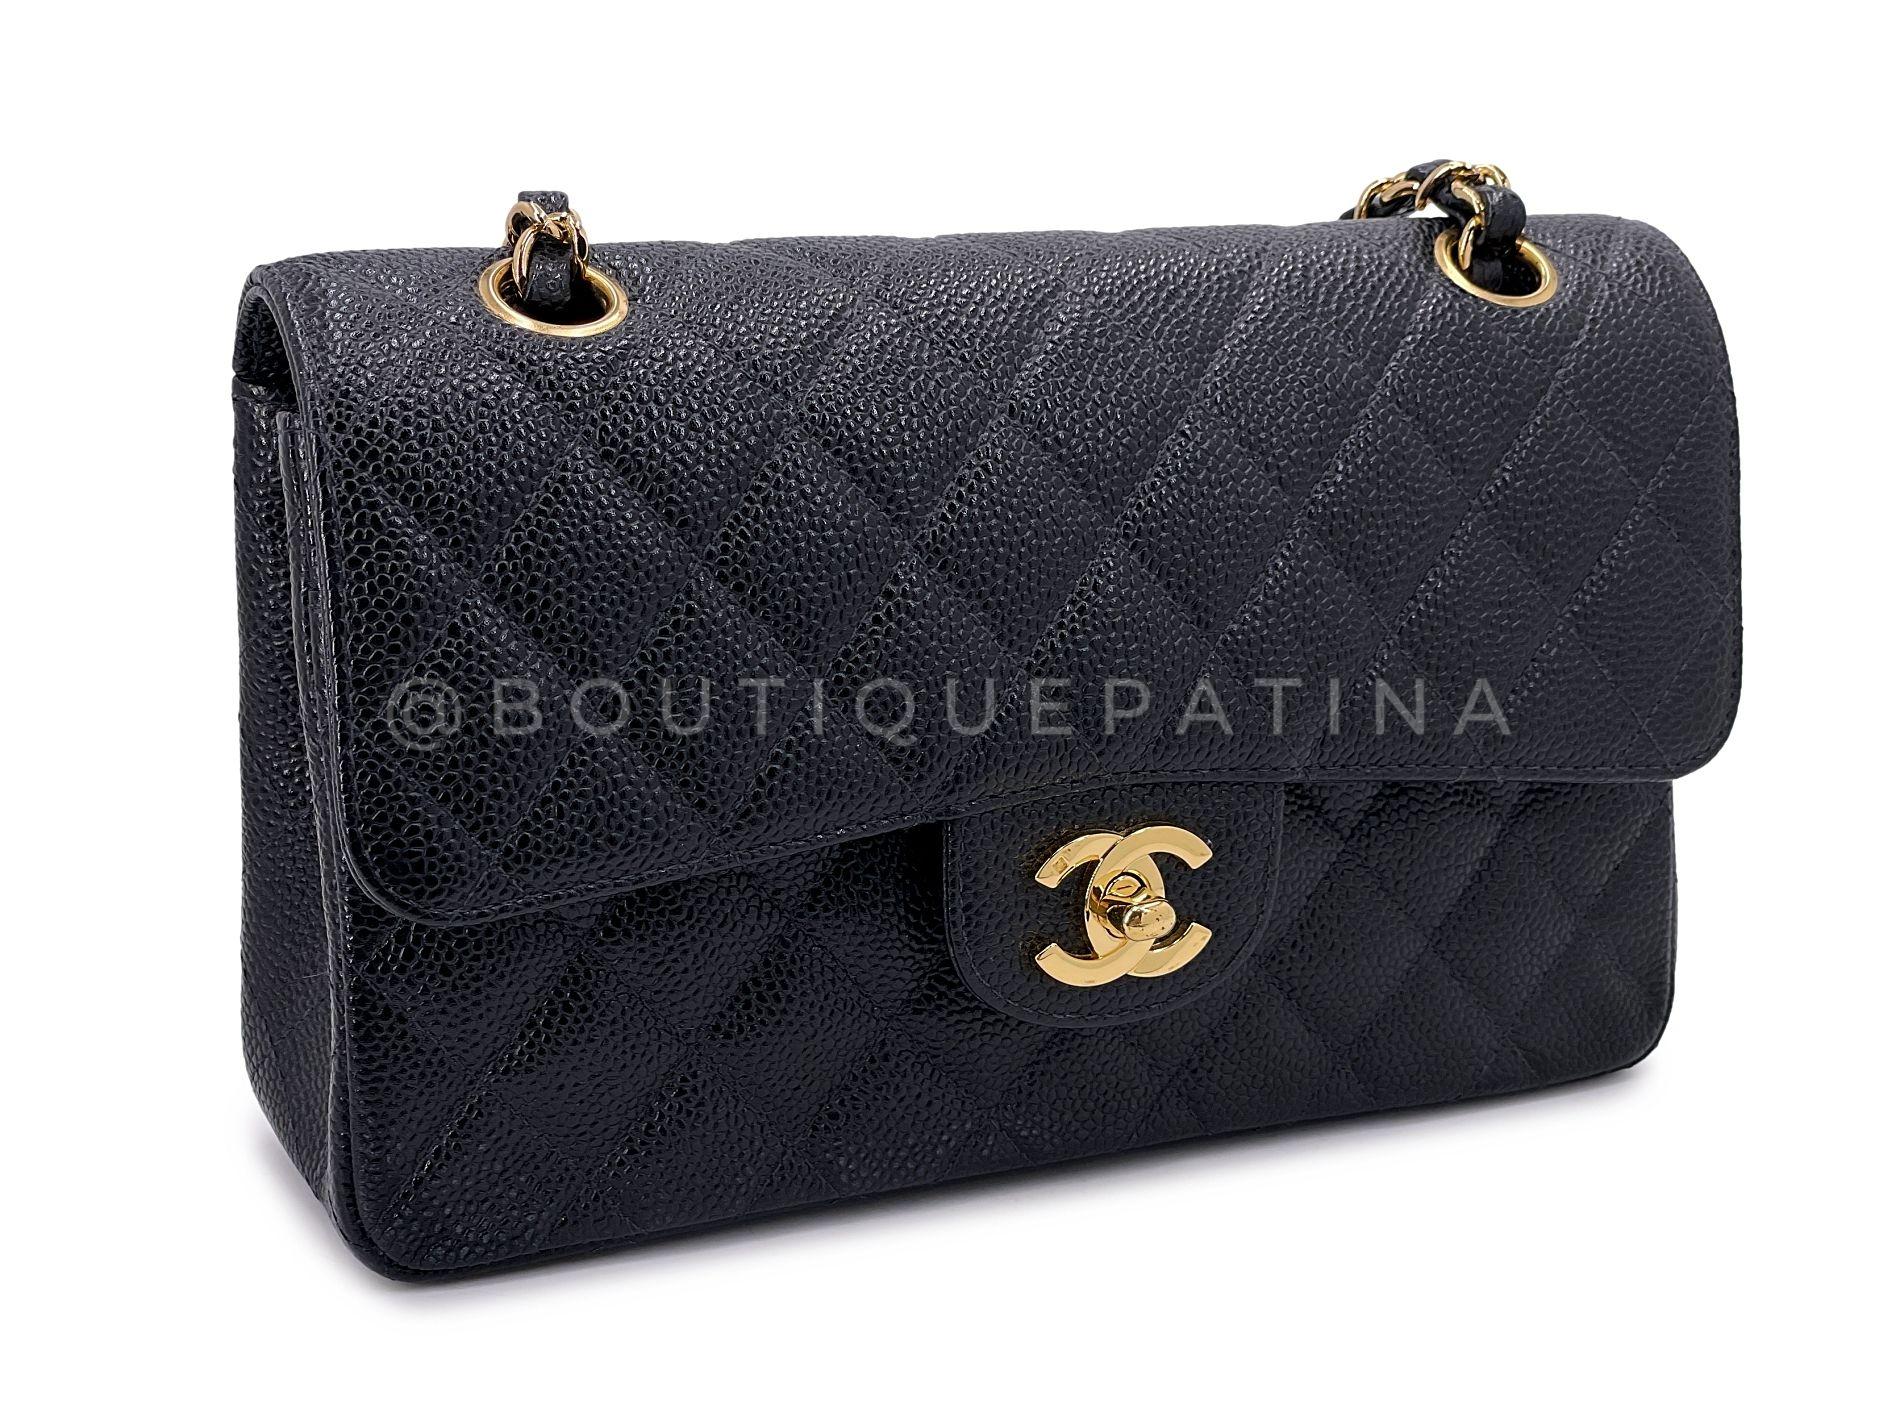 Chanel 2003 Vintage Black Caviar Small Classic Double Flap Bag 24k GHW 67931 In Excellent Condition For Sale In Costa Mesa, CA